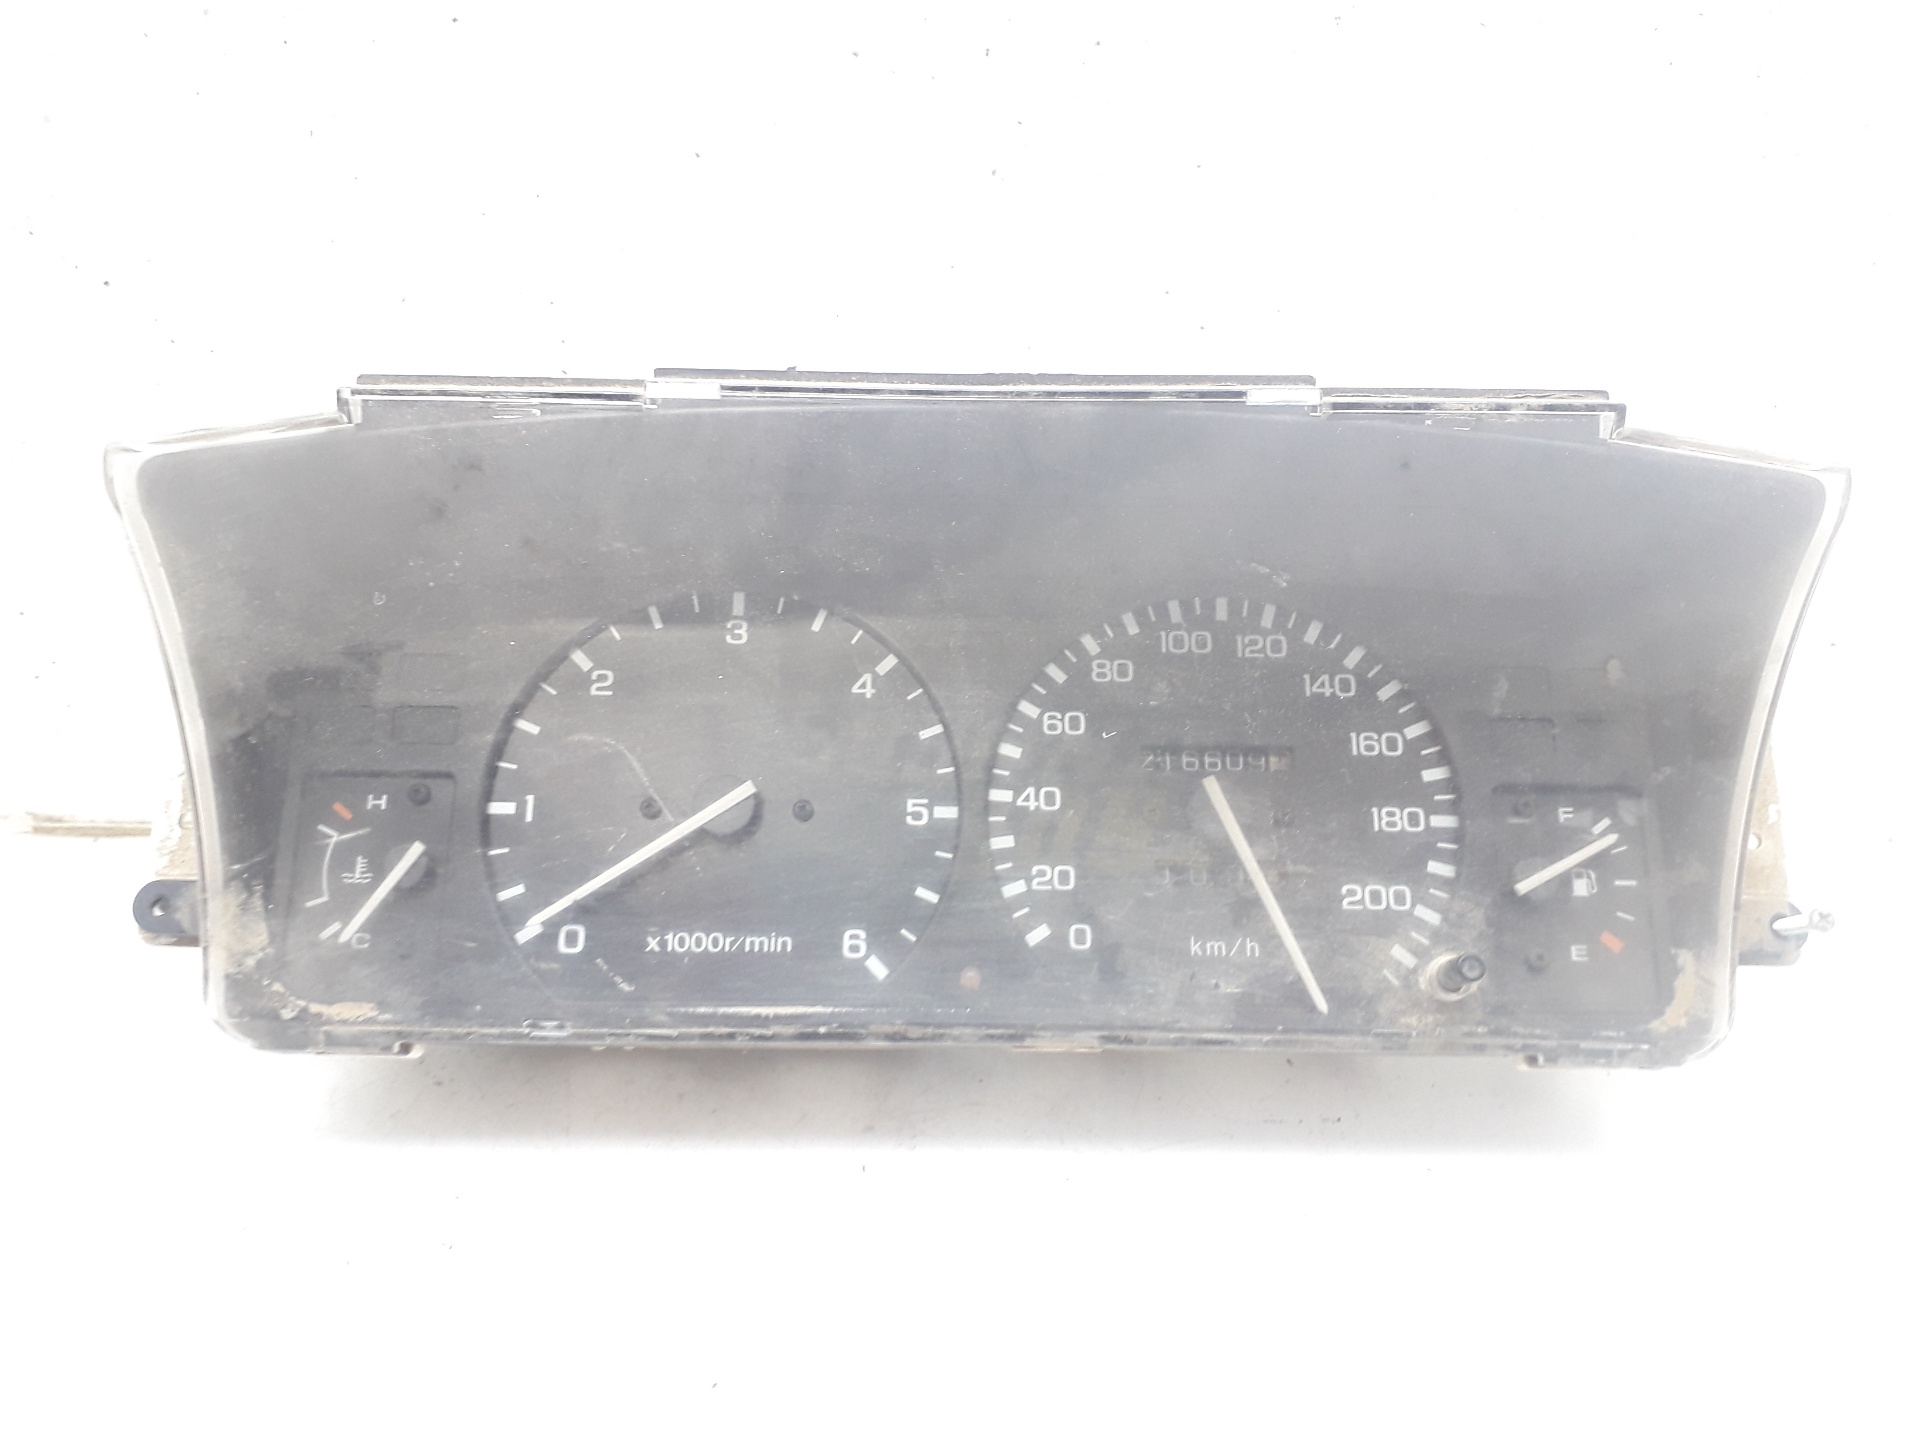 LAND ROVER Discovery 1 generation (1989-1997) Speedometer LR0007002 25248043